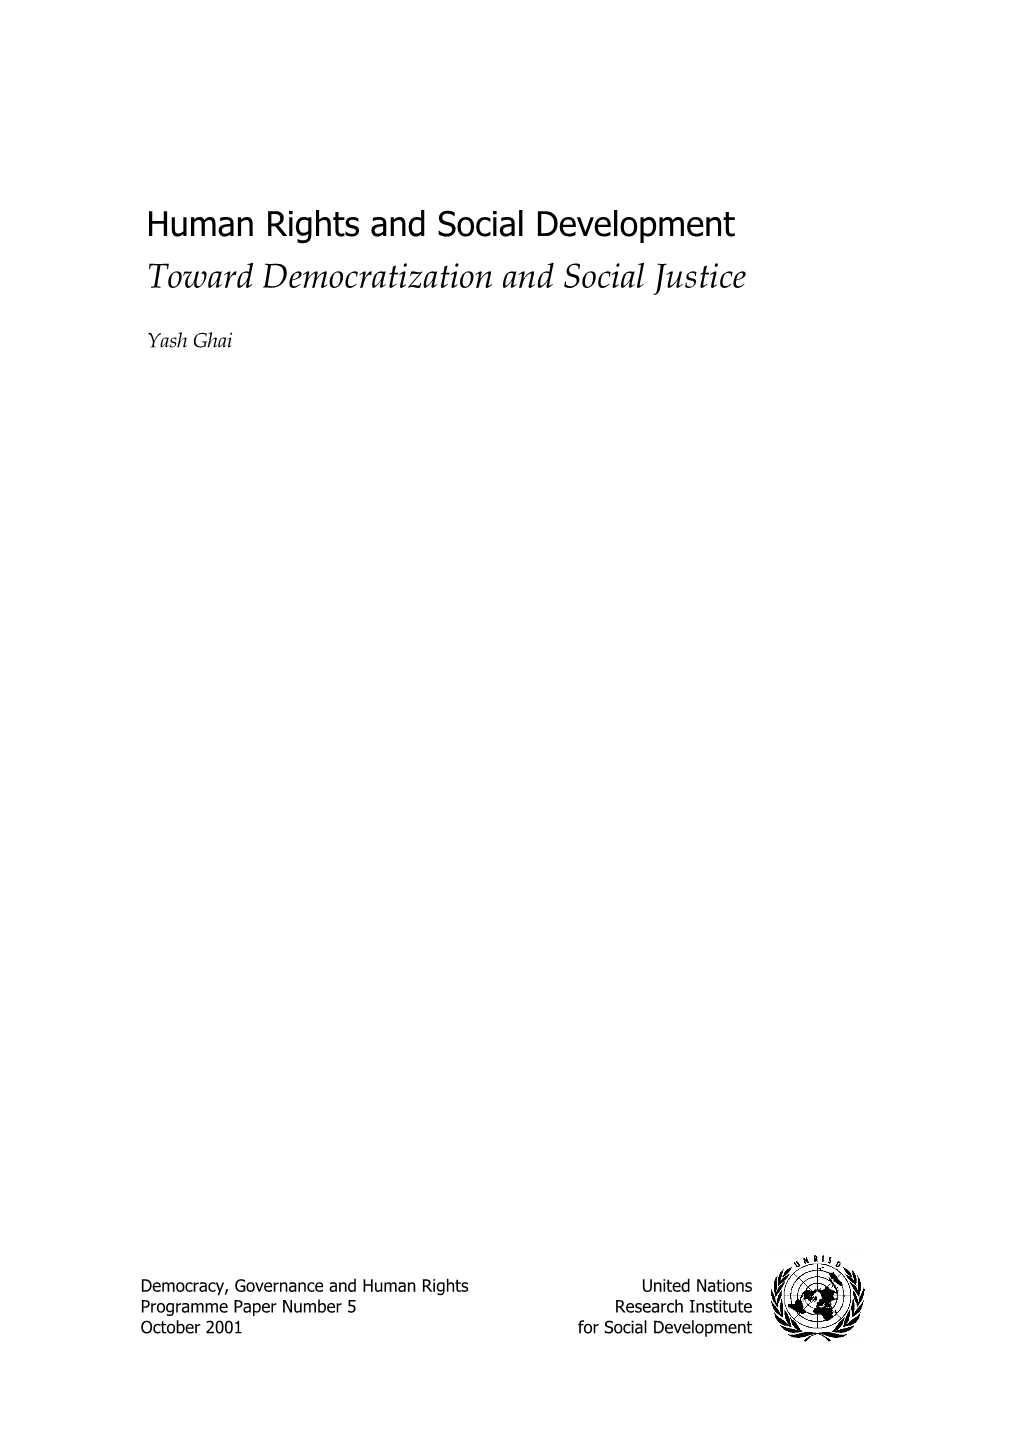 Globalization and Human Rights 40